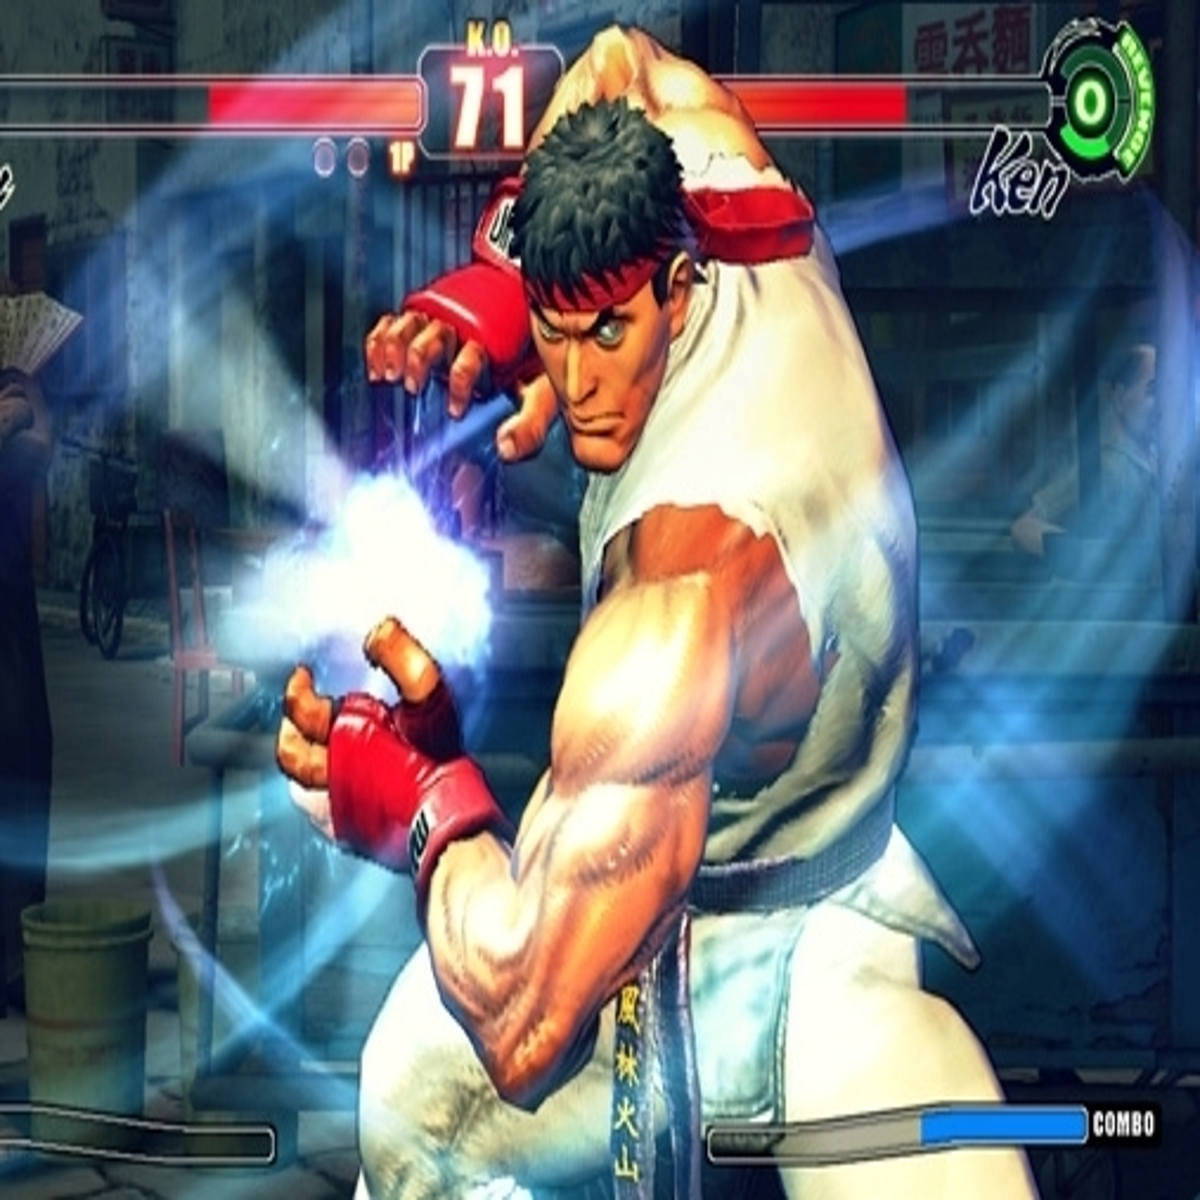 Street Fighter 4 is so good maybe we don't need a sequel just yet